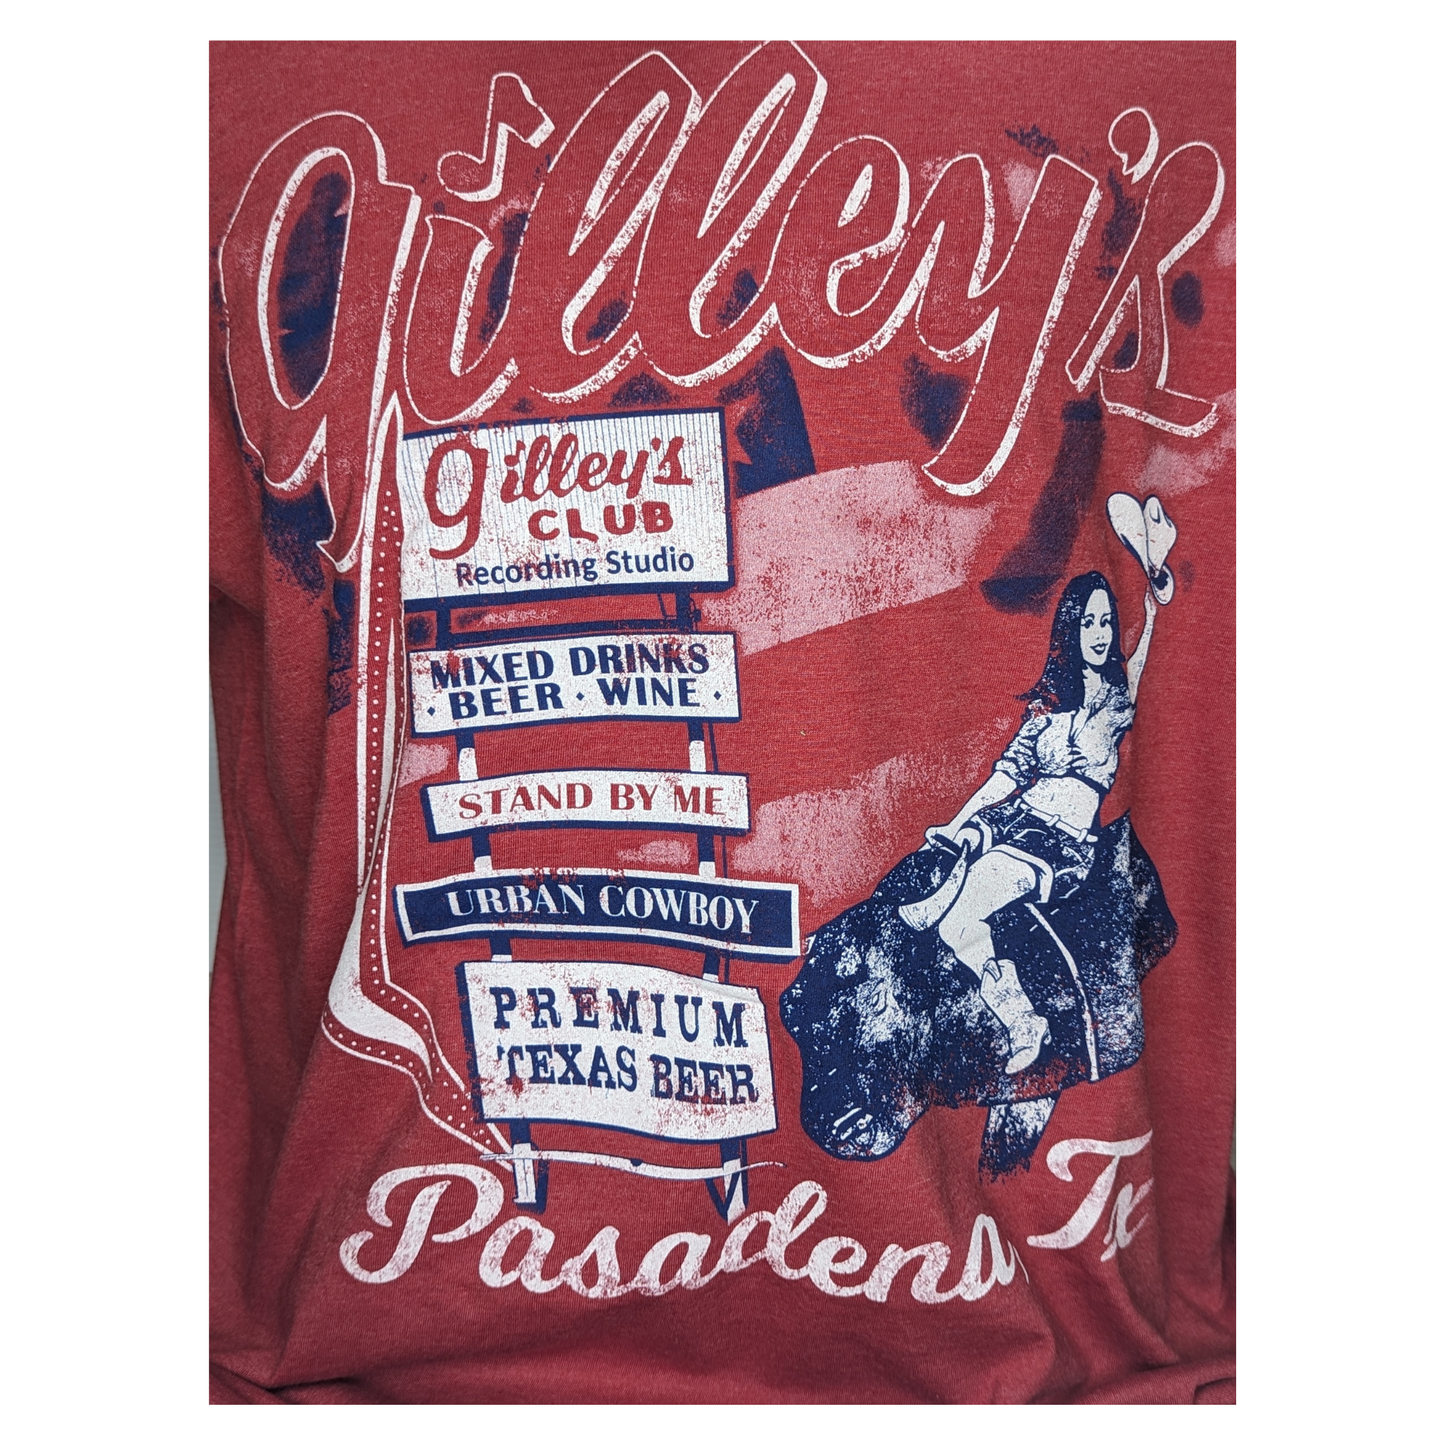 Gilley's Beer Vintage Sign and Bull Rider Shirt